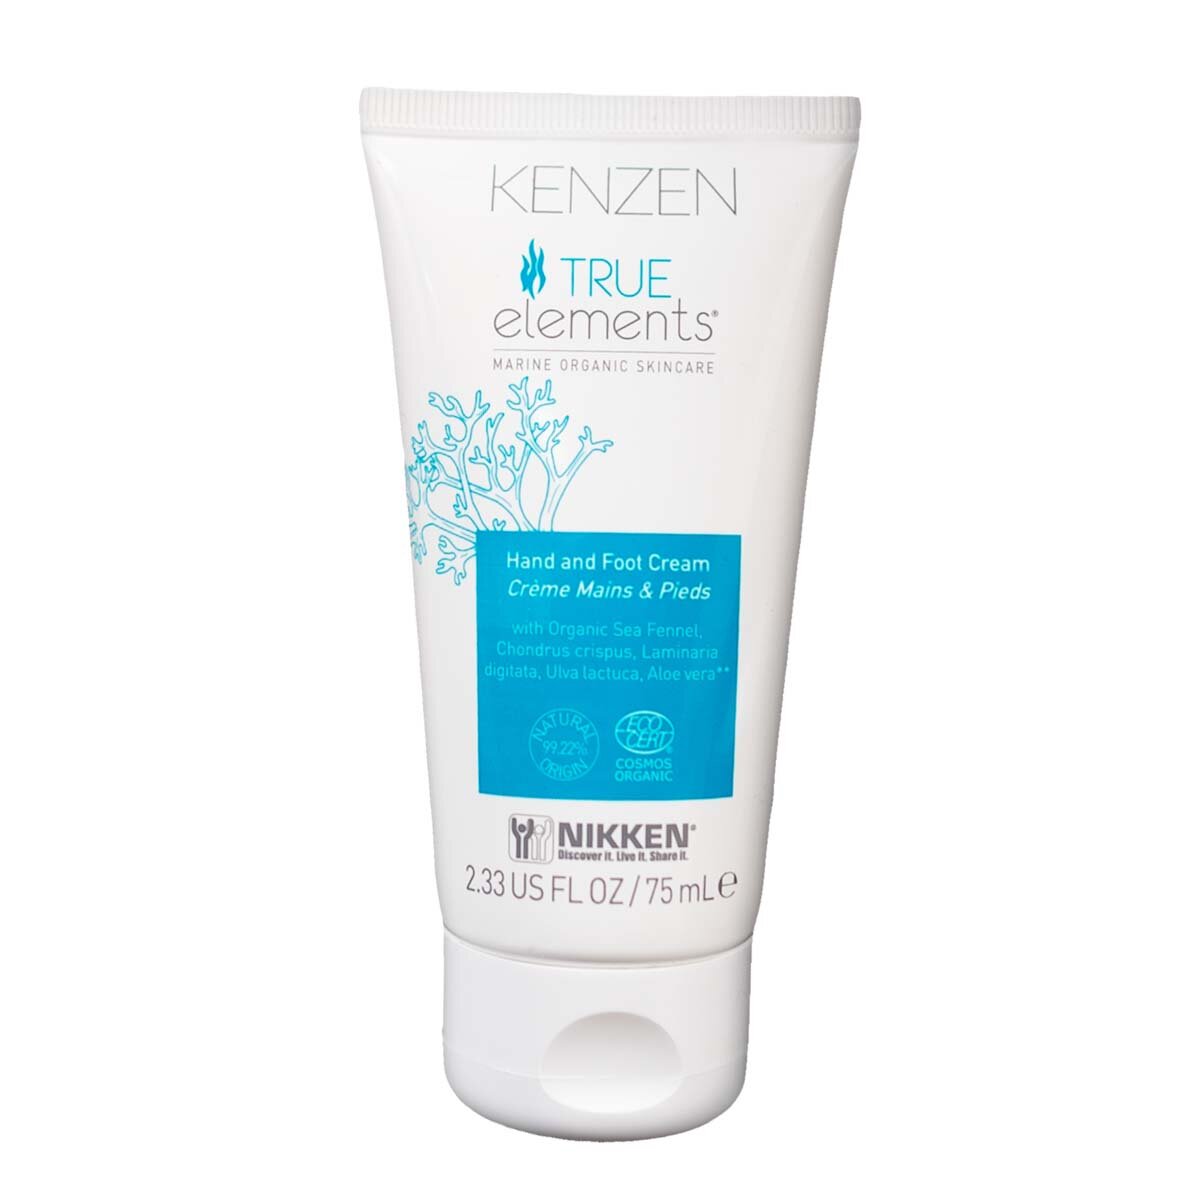 True Elements Hand and Foot Cream